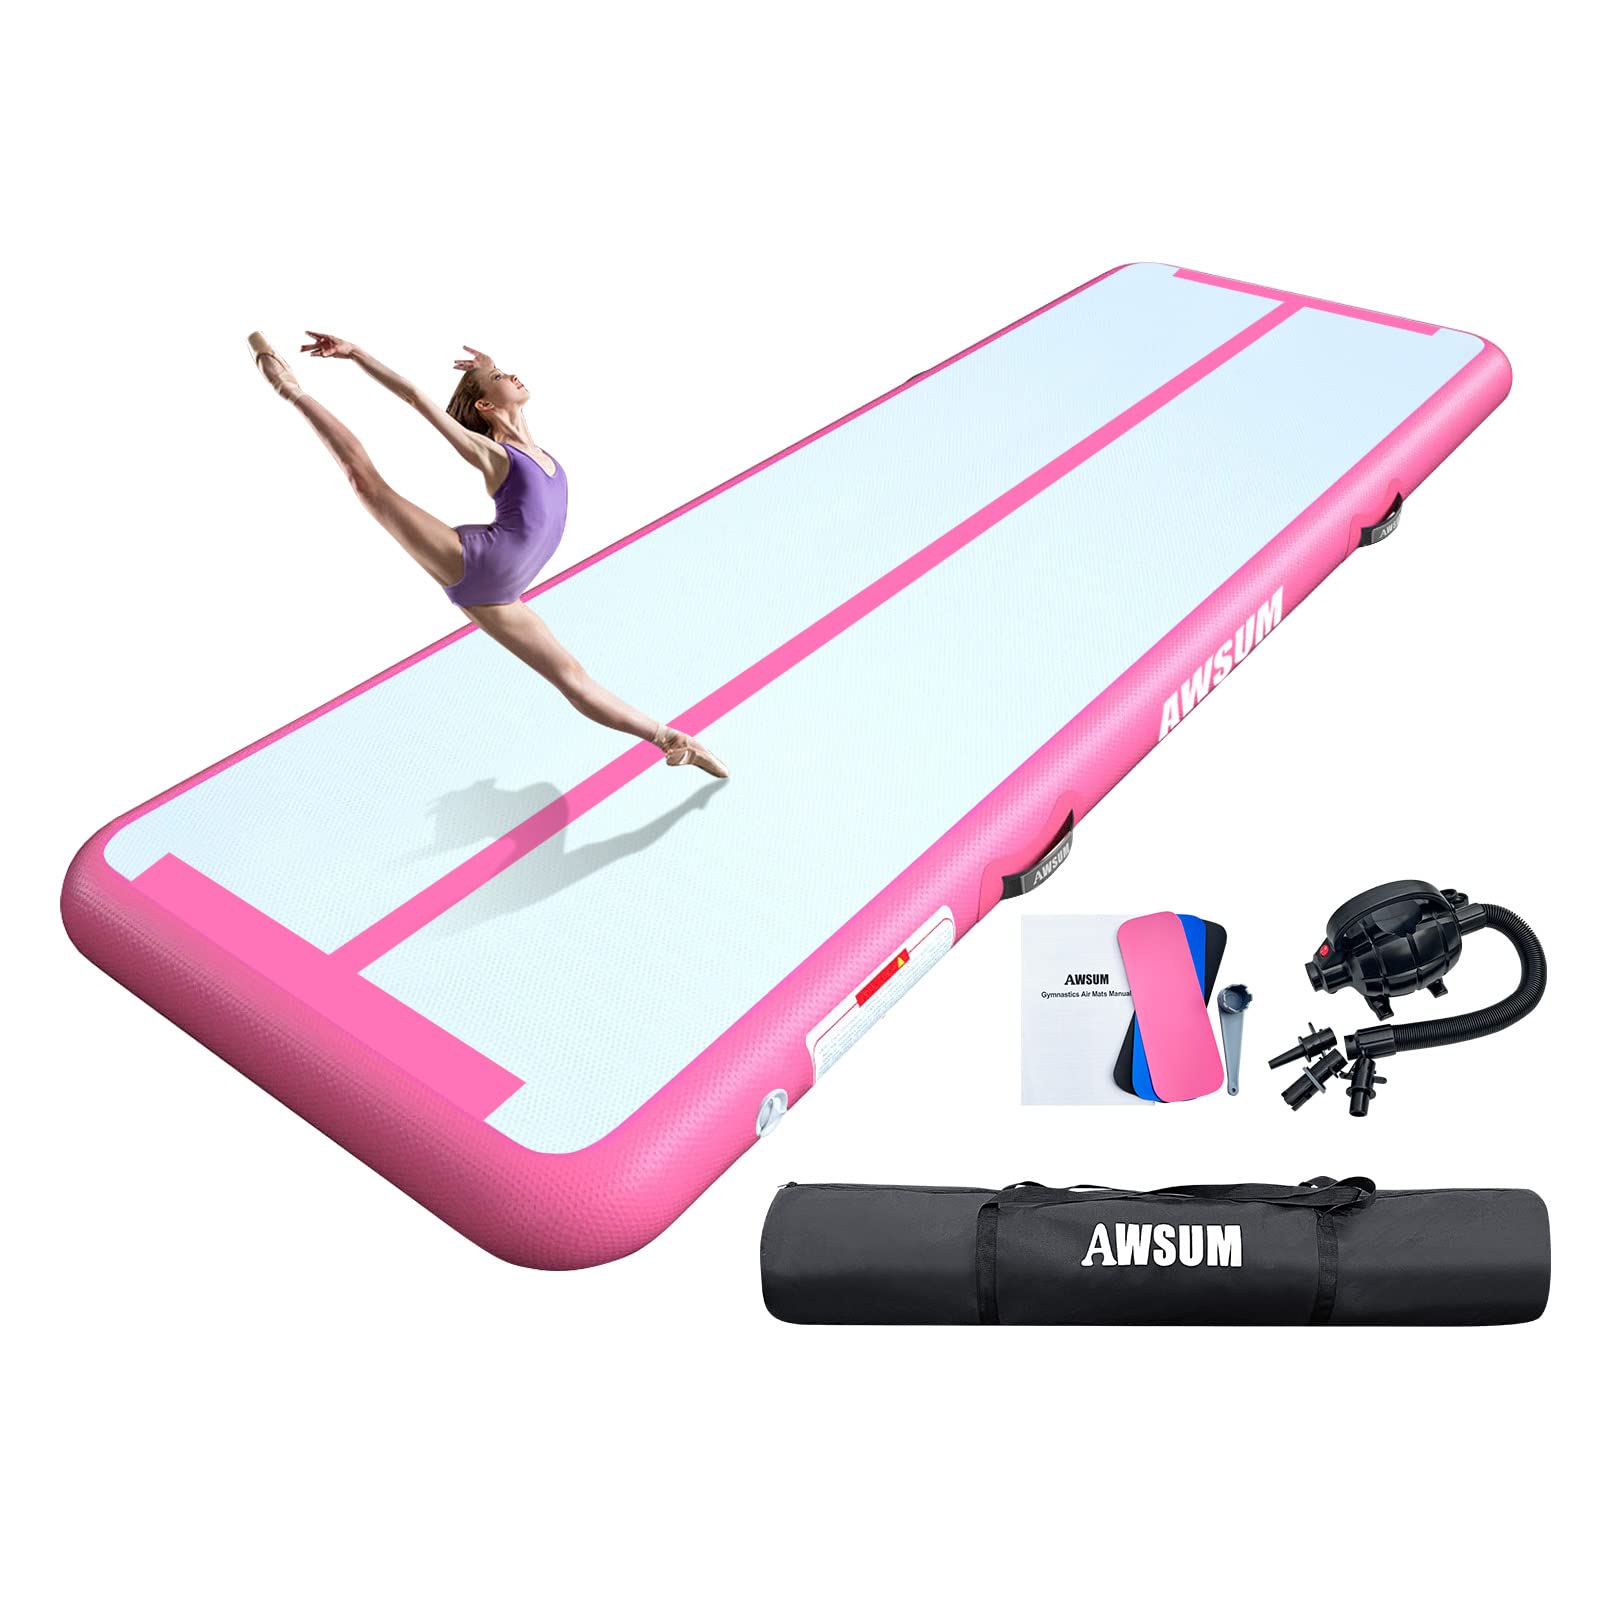 AWSUM Inflatable Air Gymnastics Mat 10ft/13ft/16ft/20ft/23ft Training mat 4/8 inches Thick tumbling mat with Electric Pump for Home/Gym/Outdoor